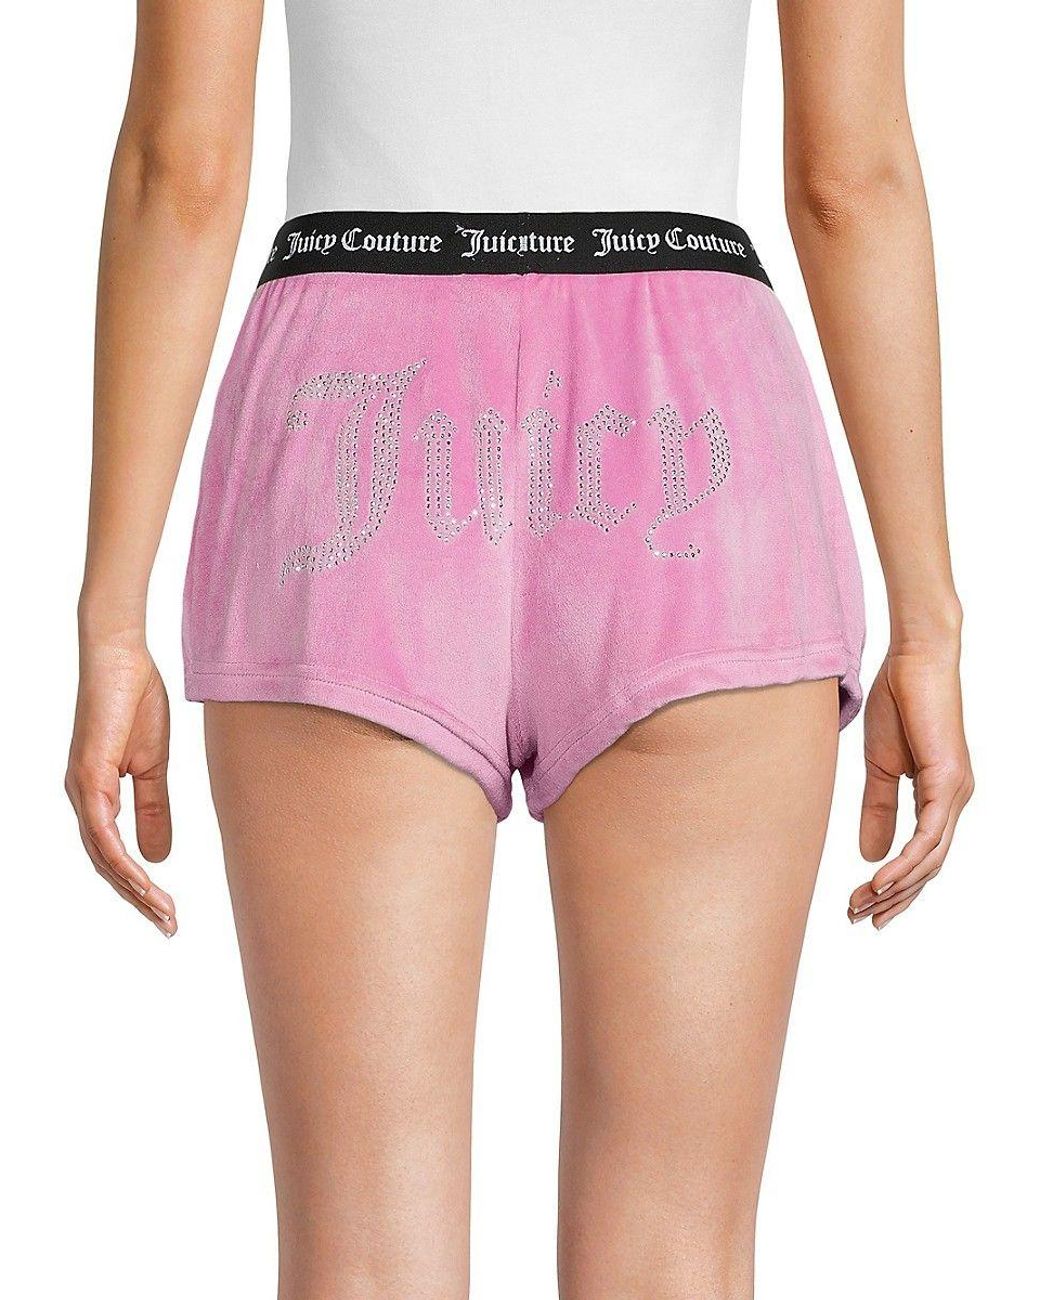 Juicy Couture New Set Of 2 Shorts XL Pink - $45 New With Tags - From Natalie